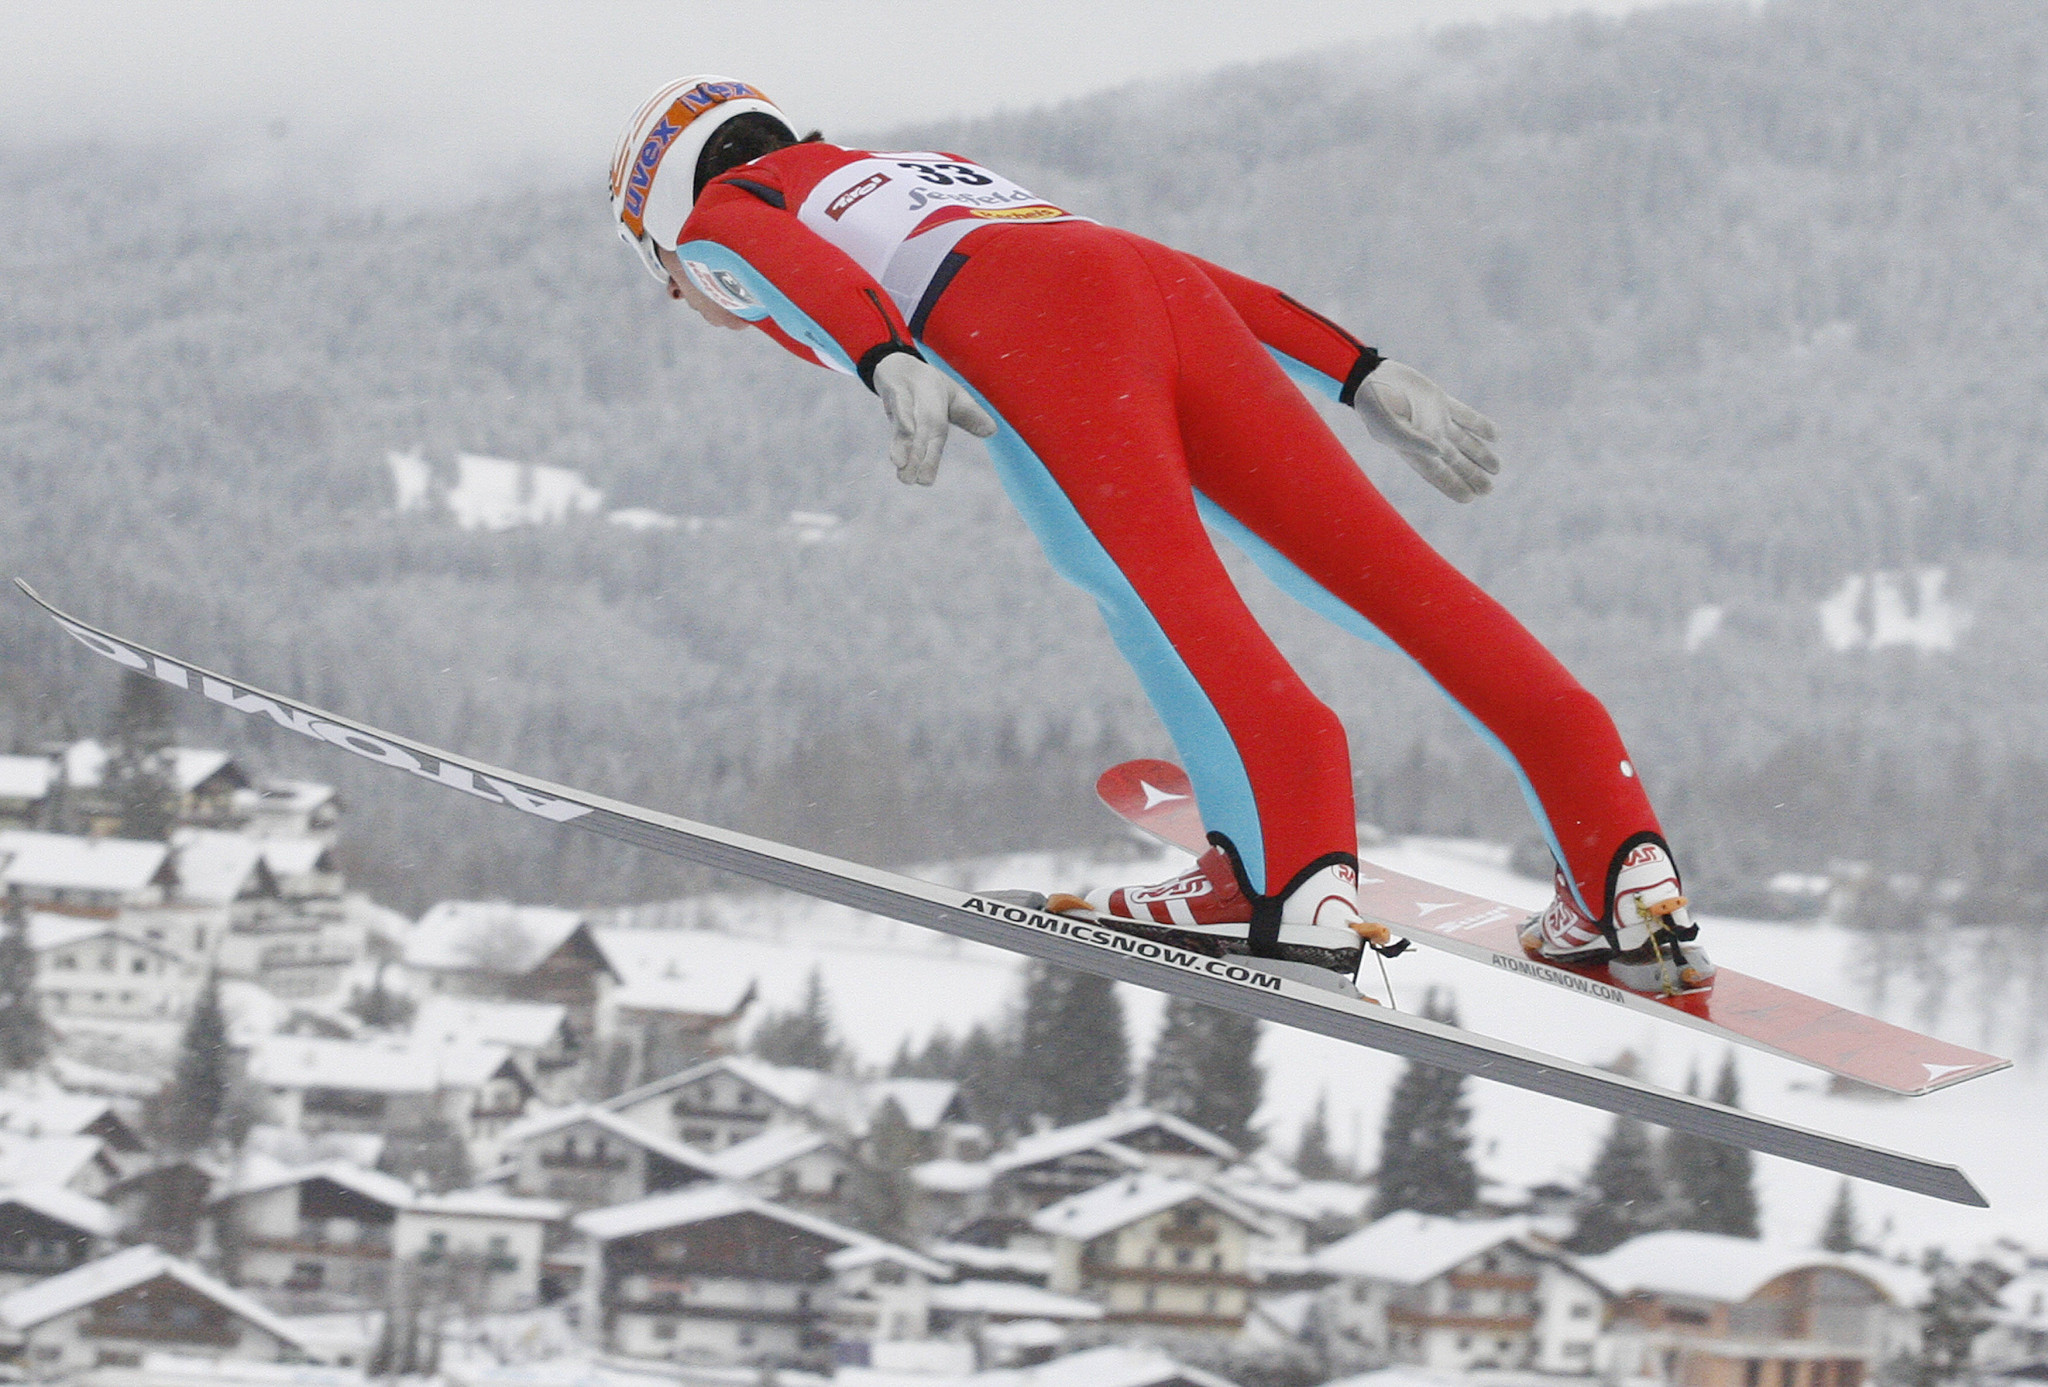 Tomaz Druml competes during the 15th Nordic Combined World Cup in January 2010 at the 'Toni-Seelos' jump in Seefeld ©Getty Images